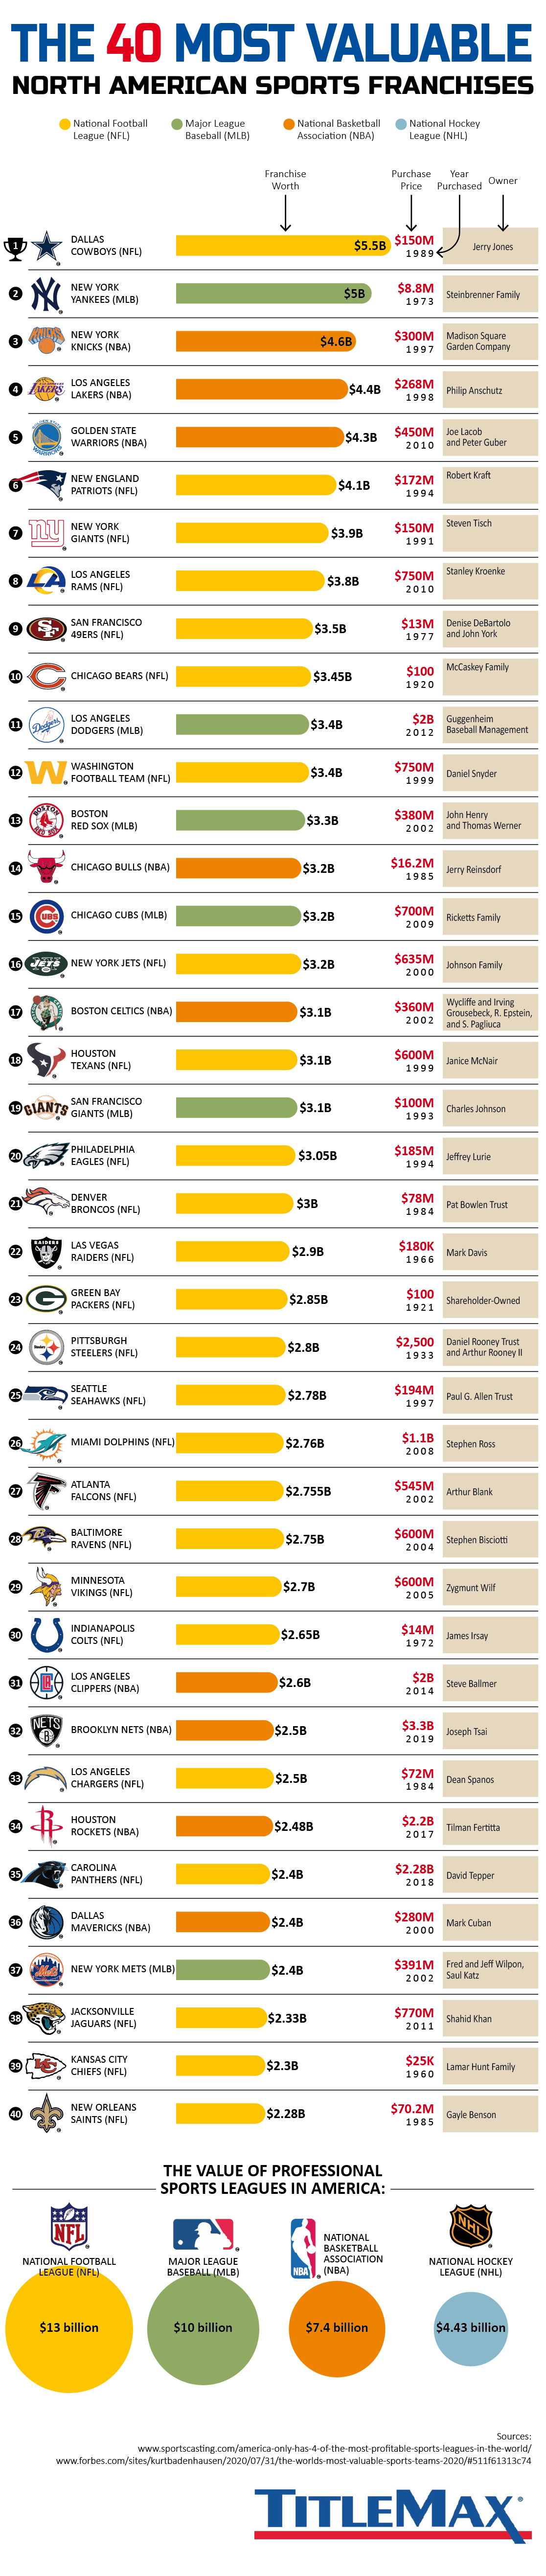 The 40 Most Valuable North American Sports Franchises 